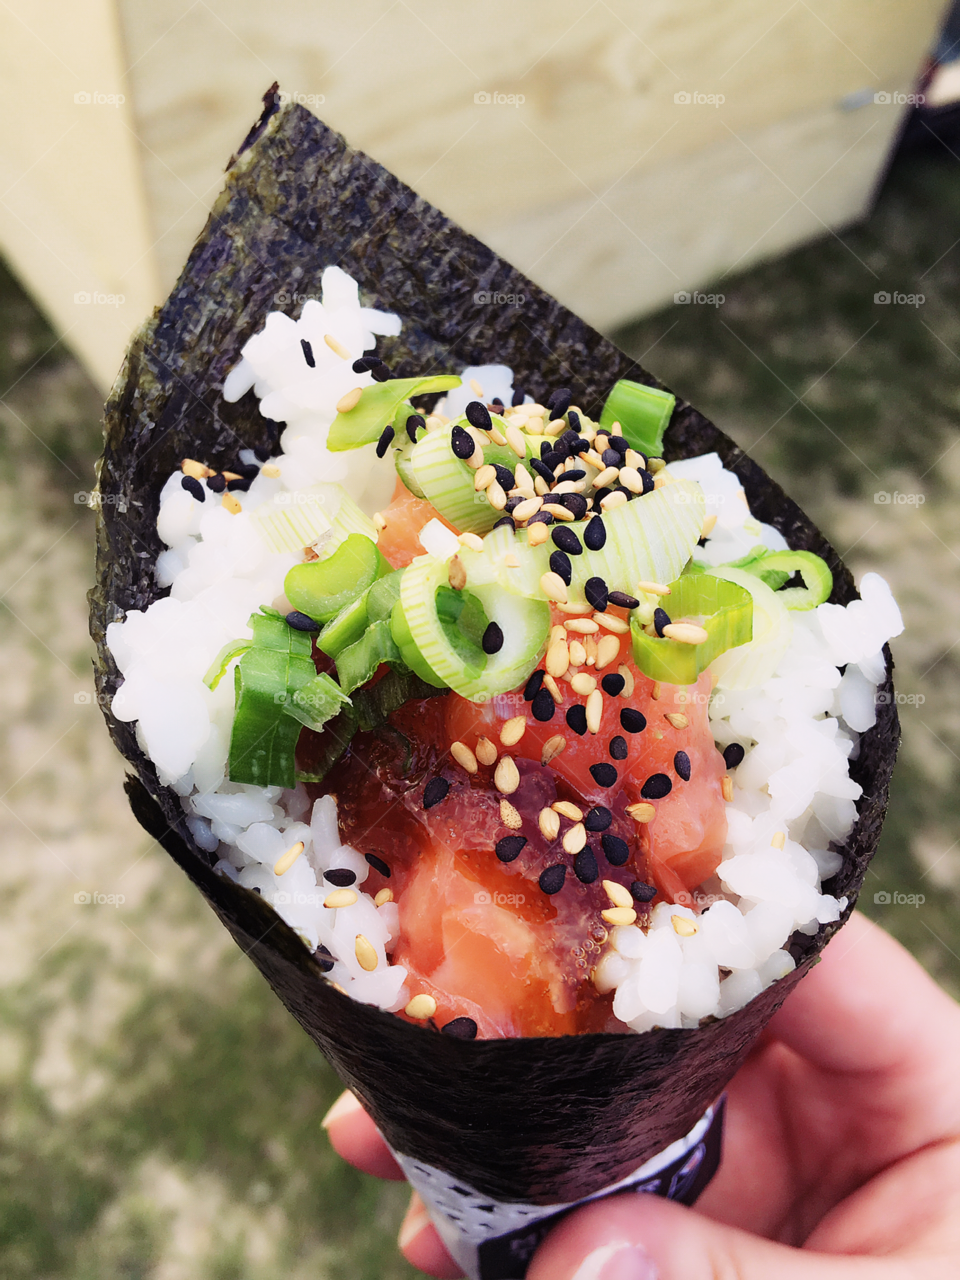 Salmon handroll sushi from food truck